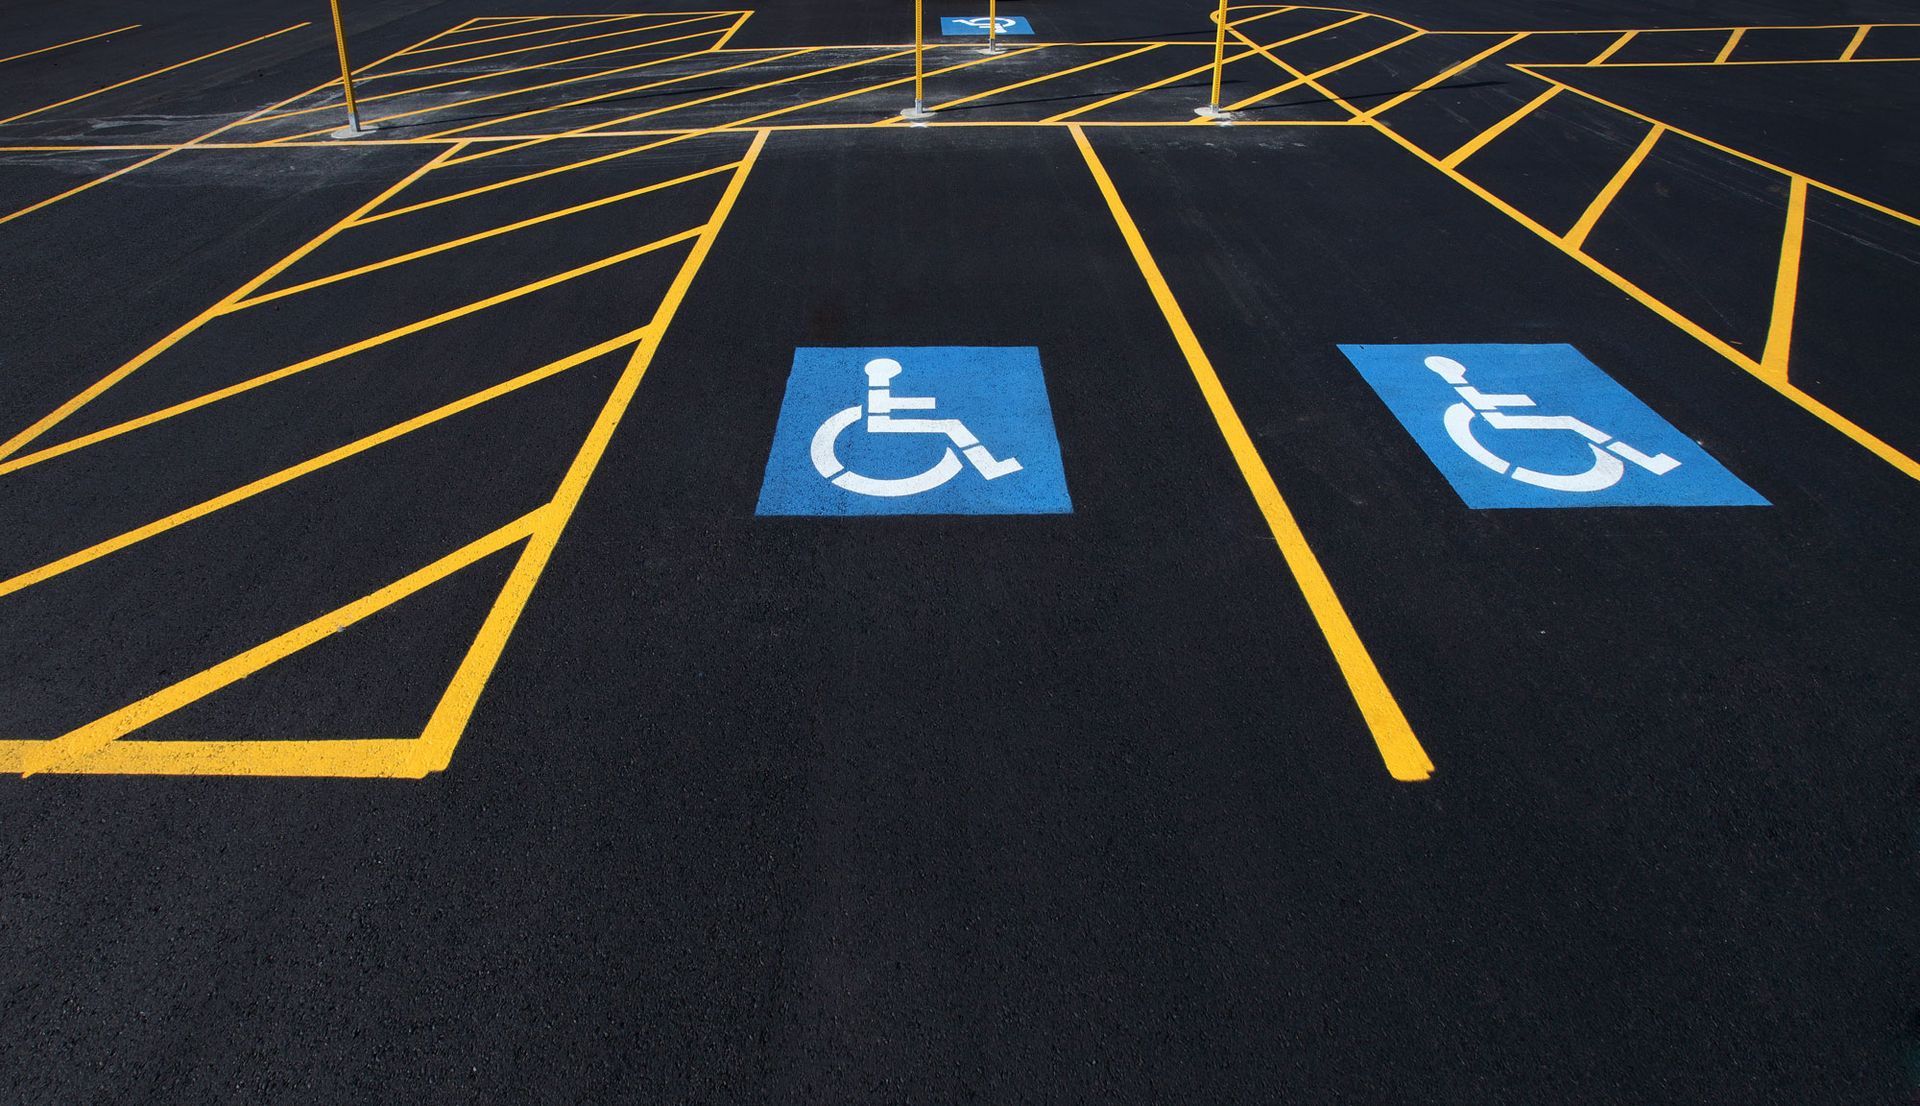 Person with disability sign in a parking lot space